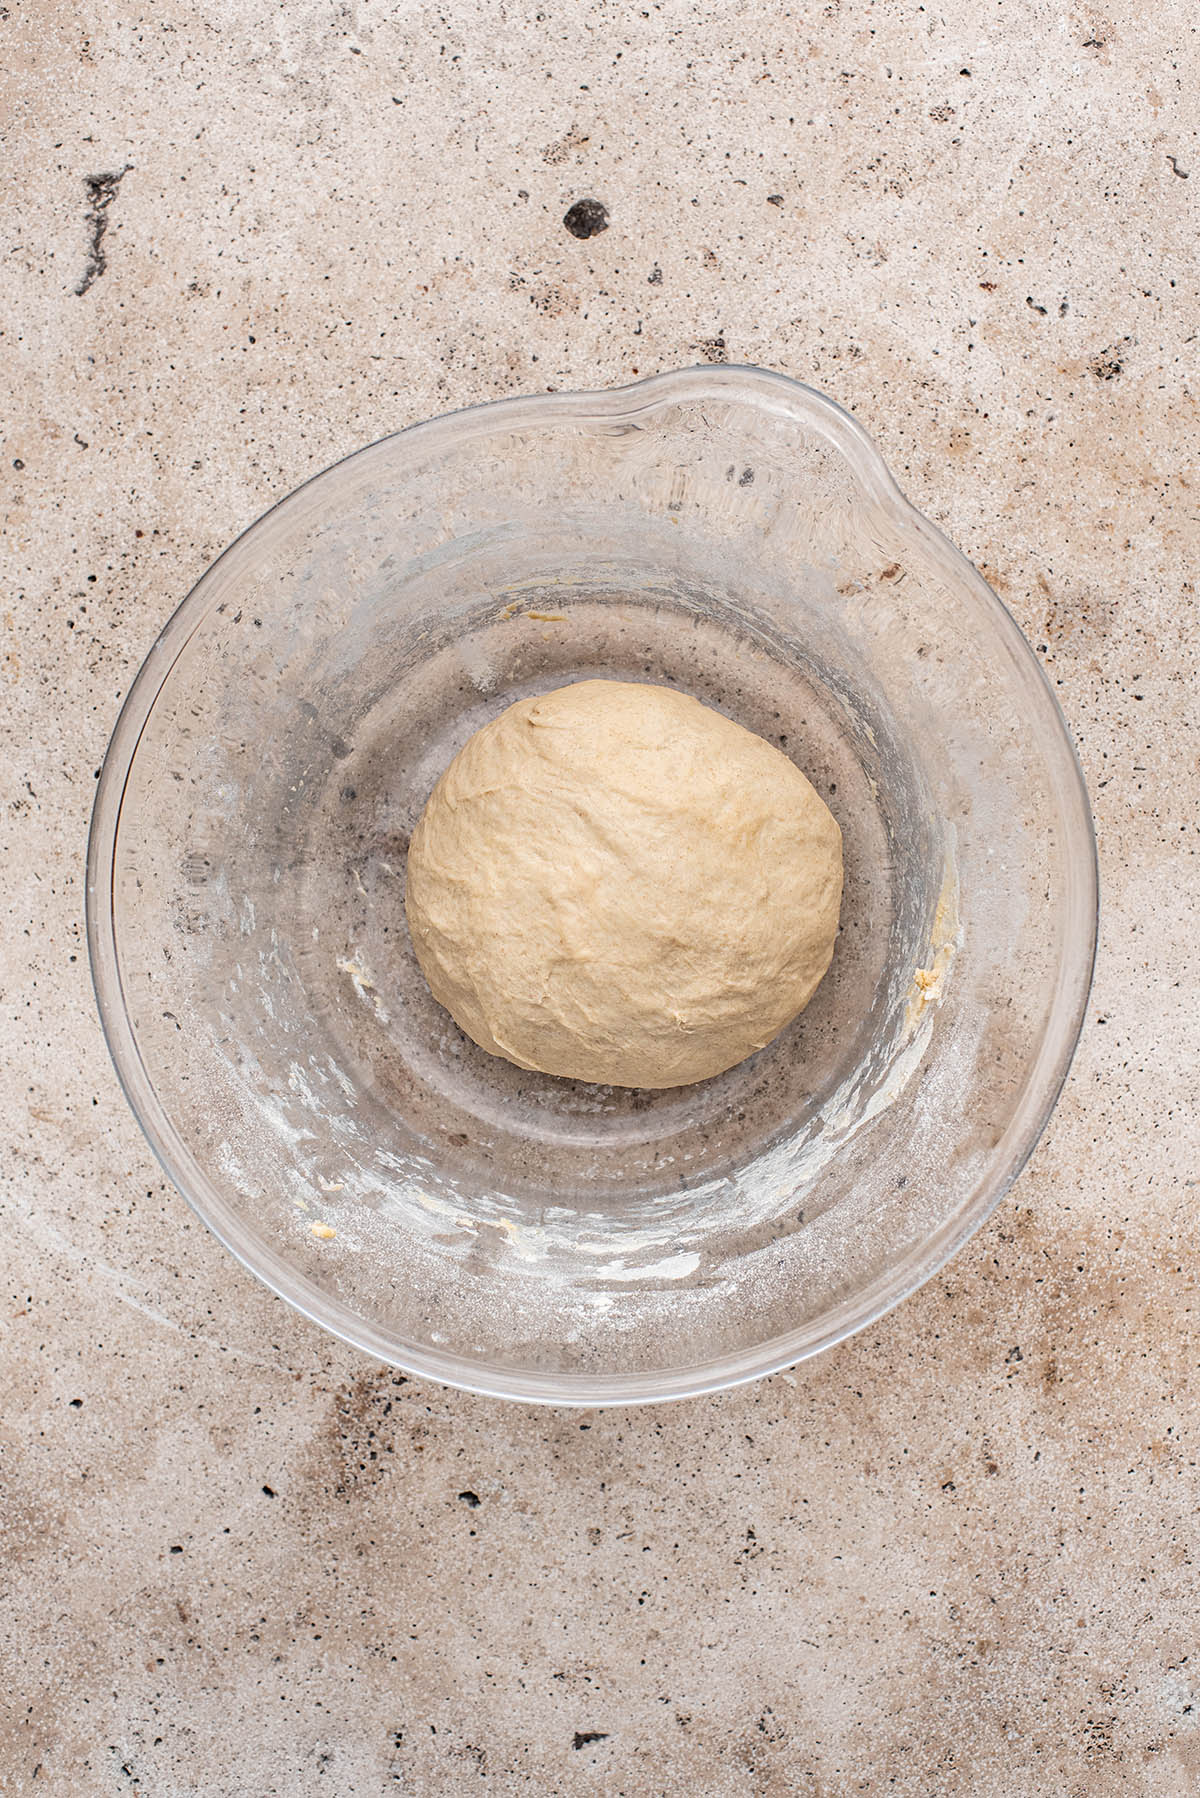 Kneaded tortilla dough in a large bowl.